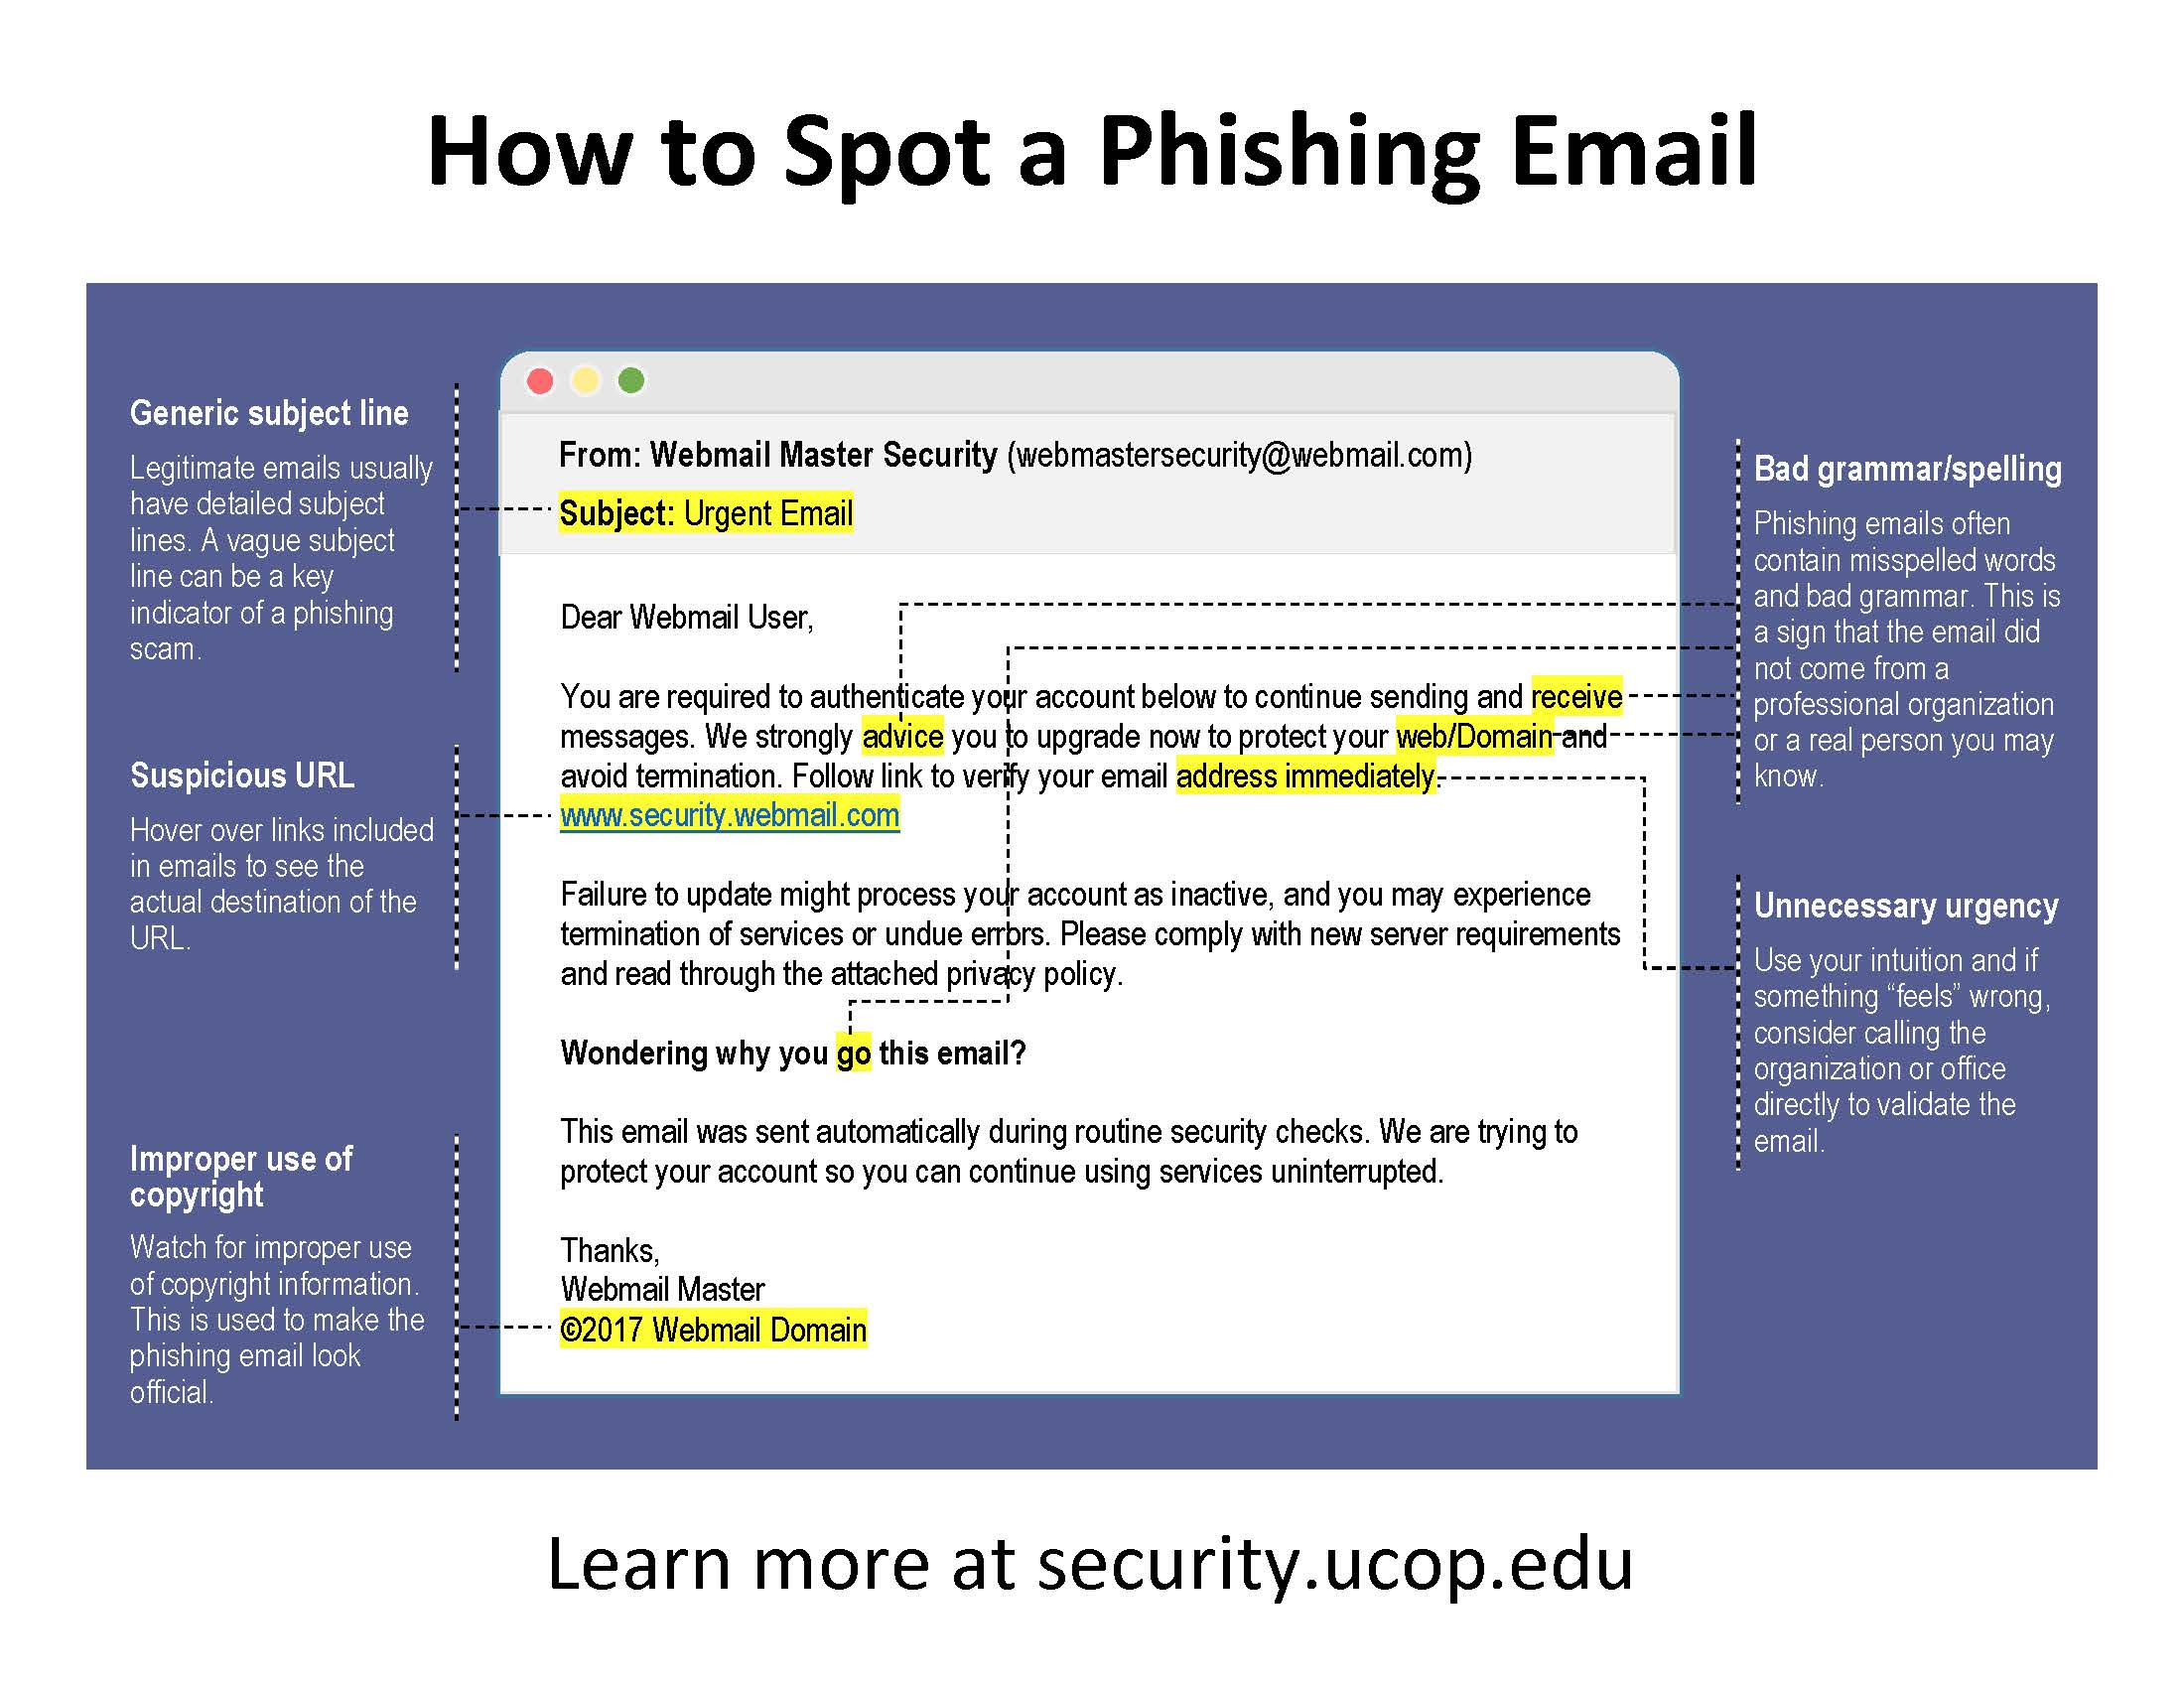 Flyer: How to spot a phishing email - image of an email with some key indicators of phishing: generic subject line, suspicious URL, bad grammar/spelling, unnecessary urgency, improper use of copyright.